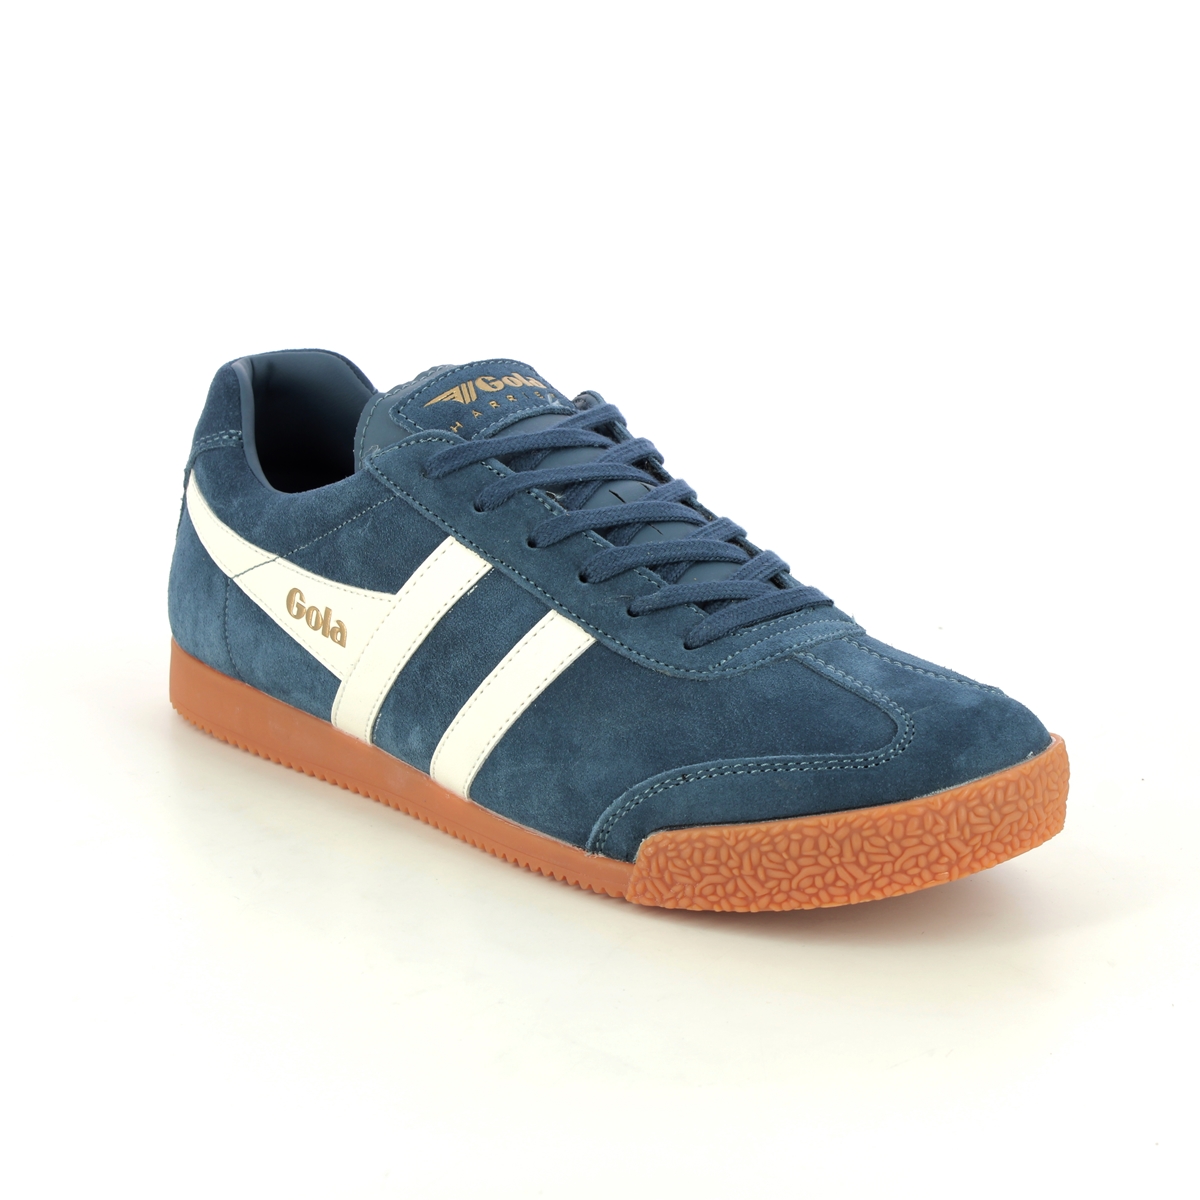 Gola Harrier M Blue Suede Mens trainers CMA192-DE in a Plain Leather in Size 7